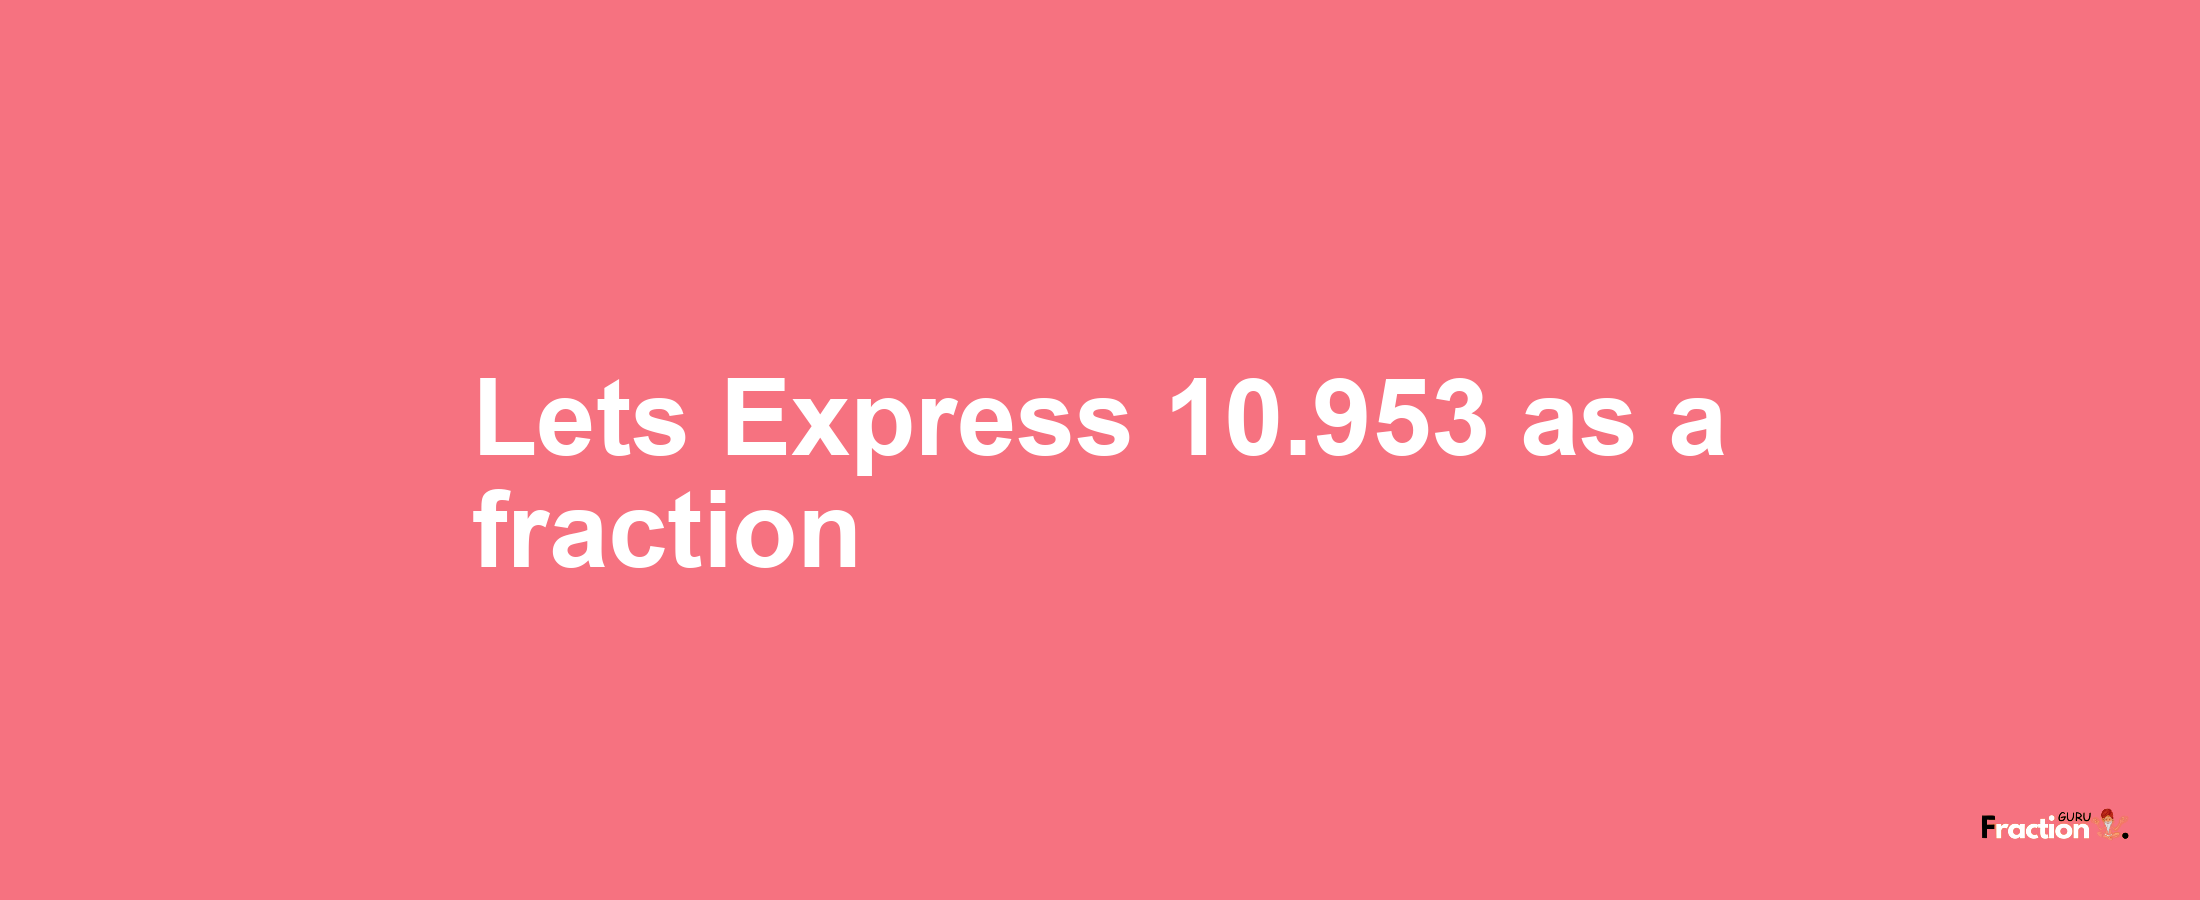 Lets Express 10.953 as afraction